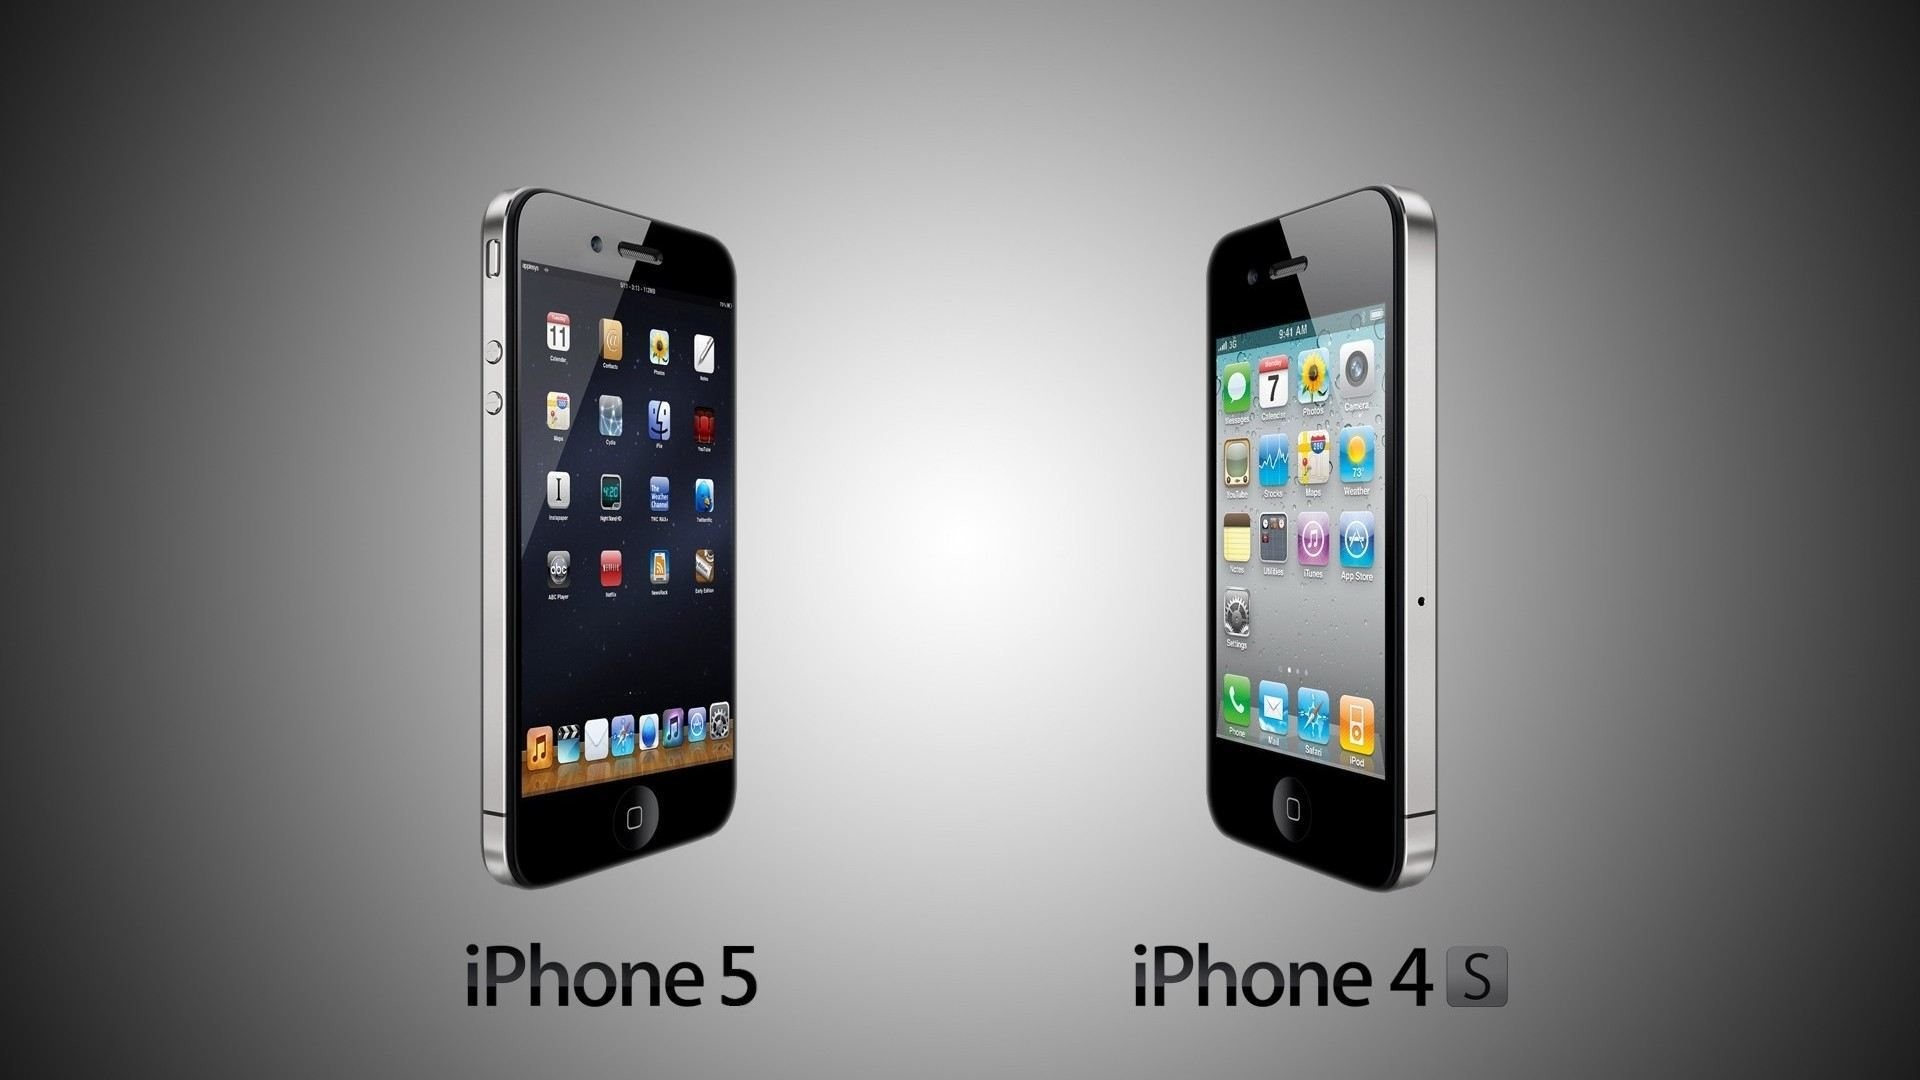 1920x1080 iPhone 5 vs. iPhone 4S - High Definition Wallpapers - HD wallpapers